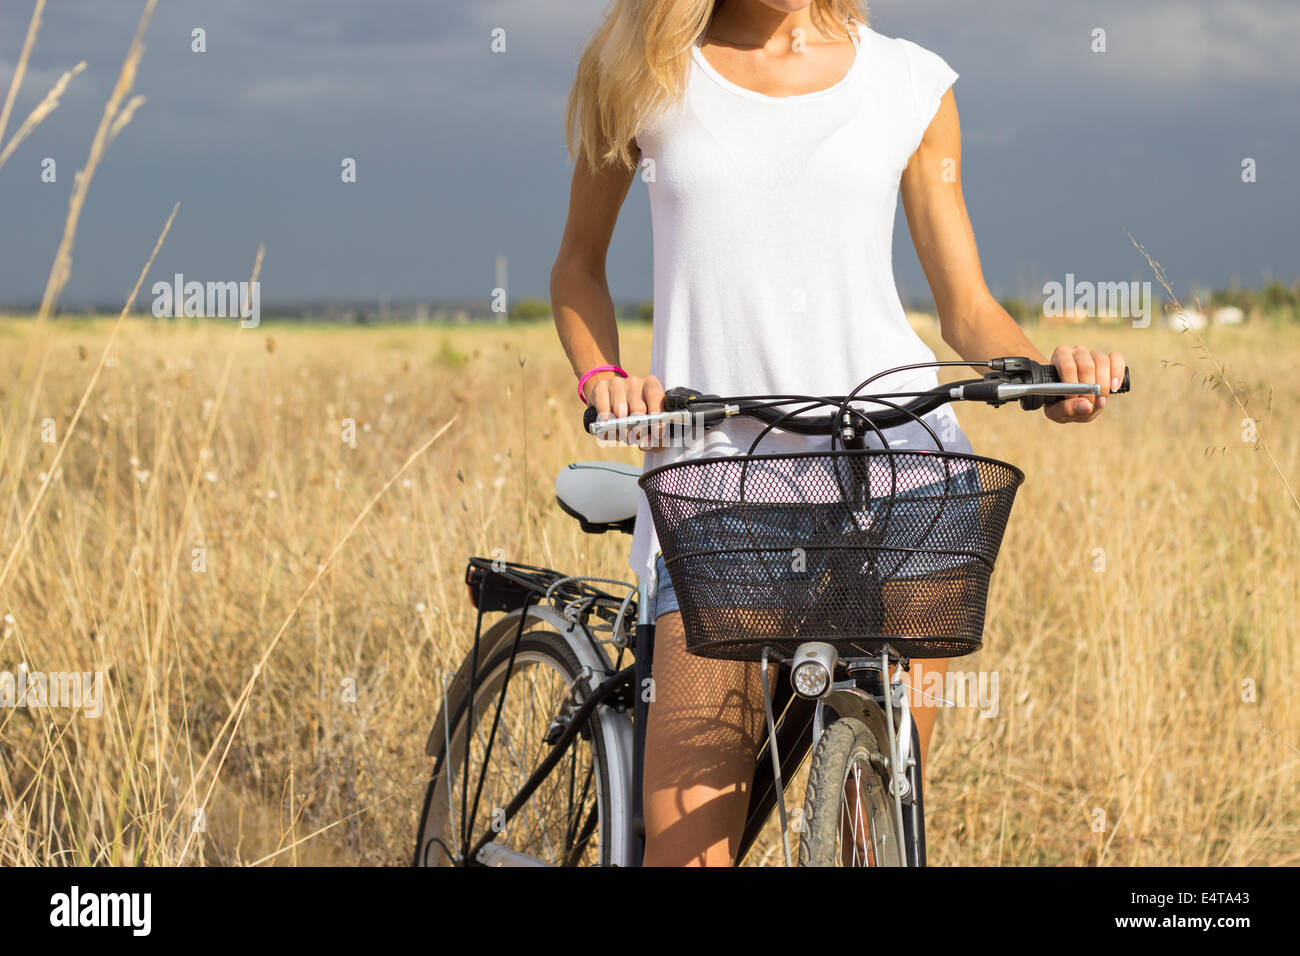 woman girl holding  bicycle countryside field summer sunlight Stock Photo